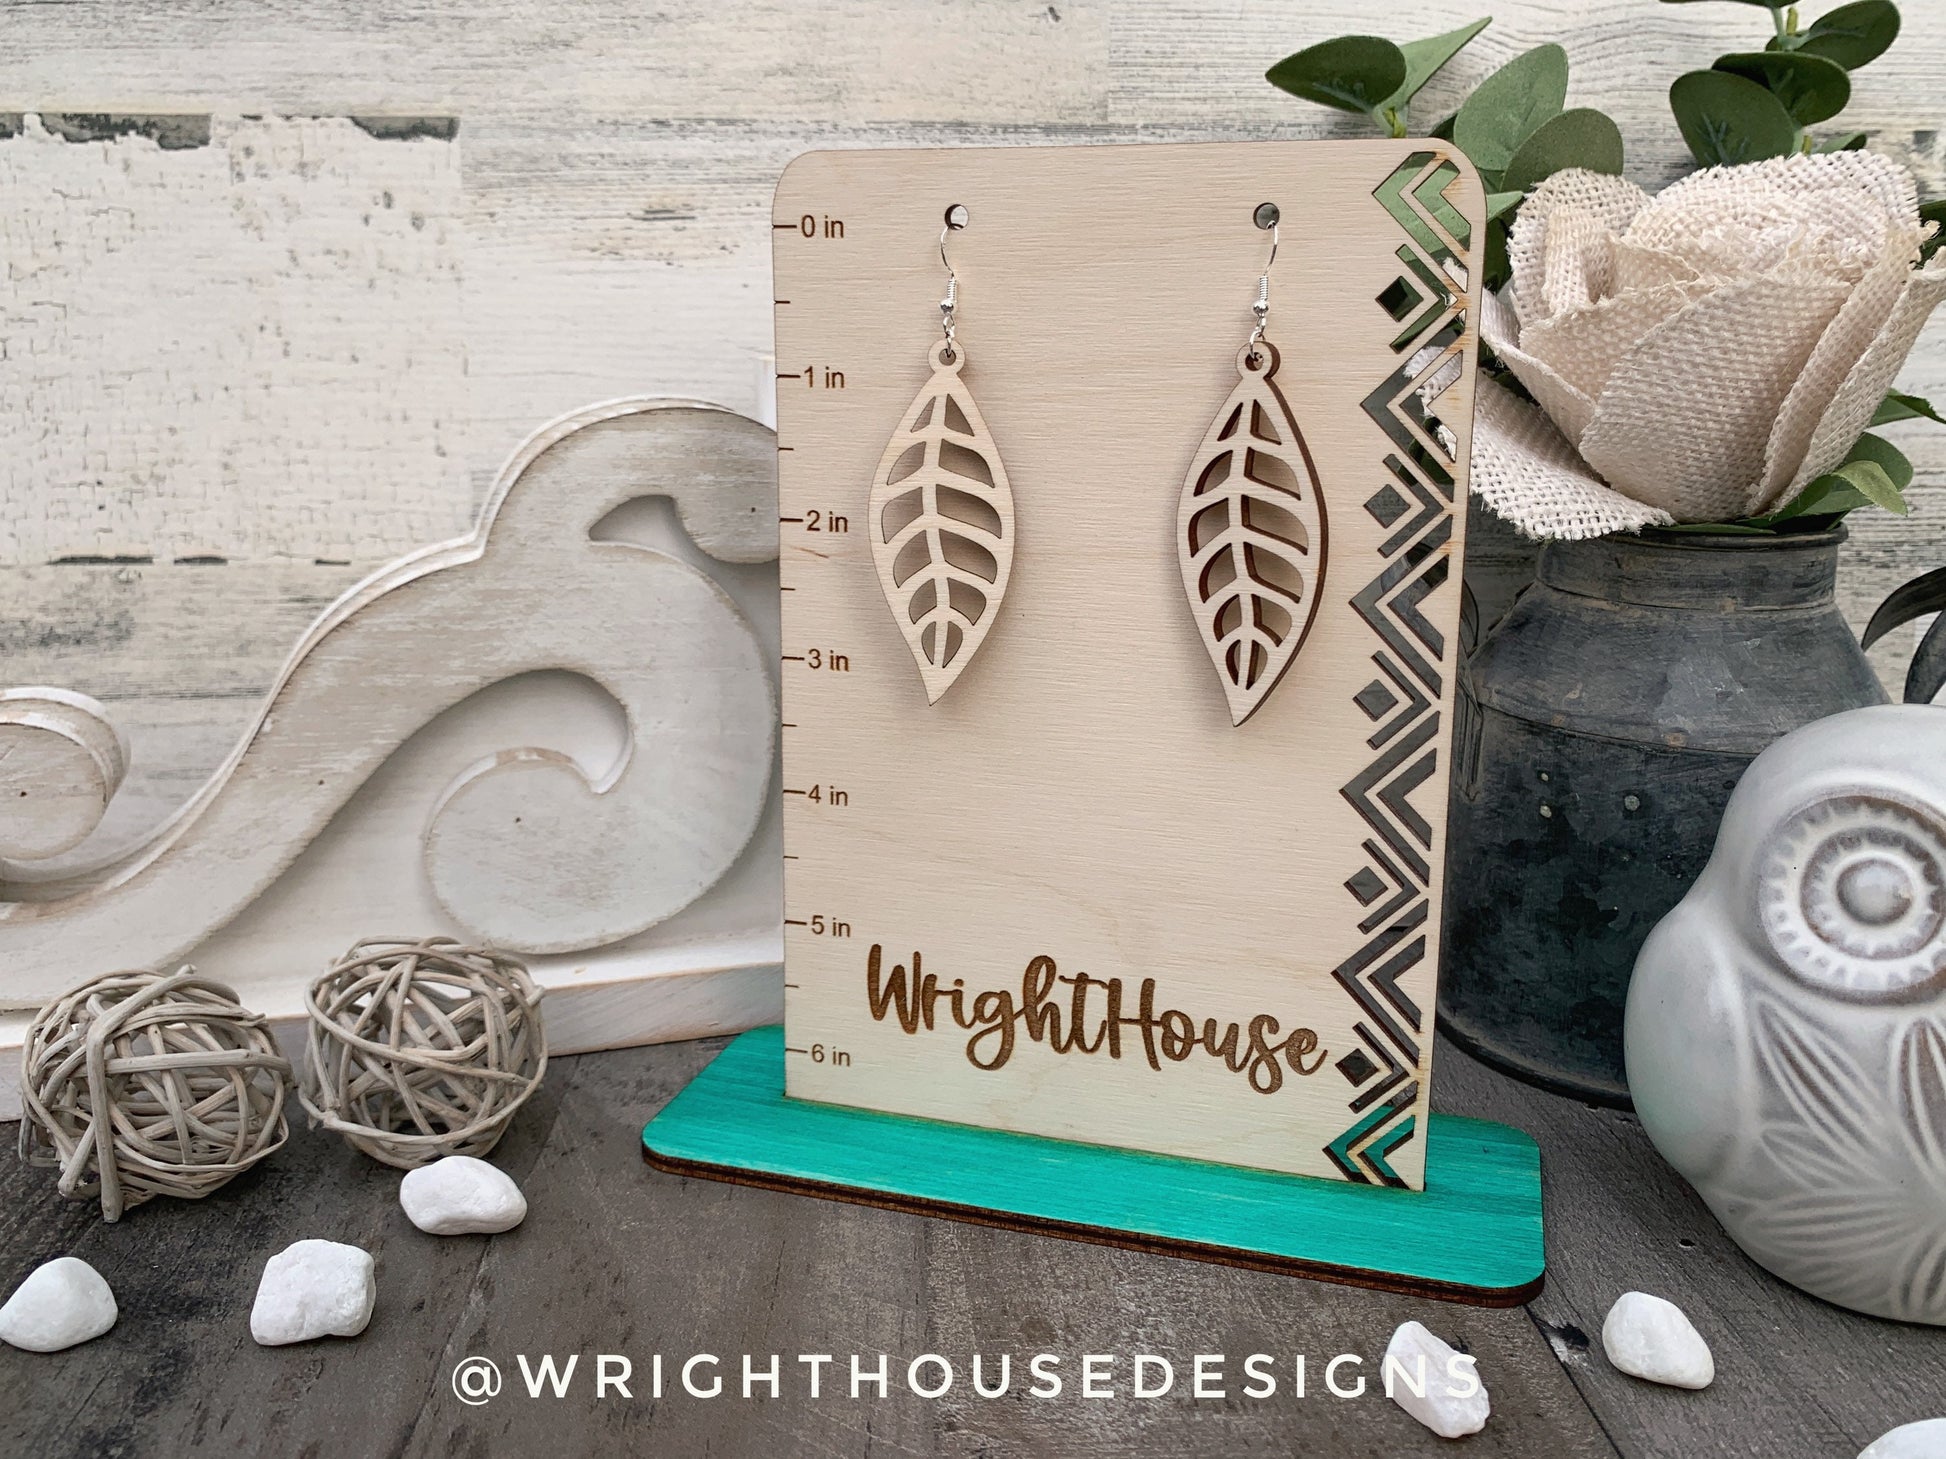 Fall Leaf Earrings - Style 4 - Light Academia - Witchy Cottagecore - Wooden Dangle Drop - Lightweight Statement Jewelry For Sensitive Skin